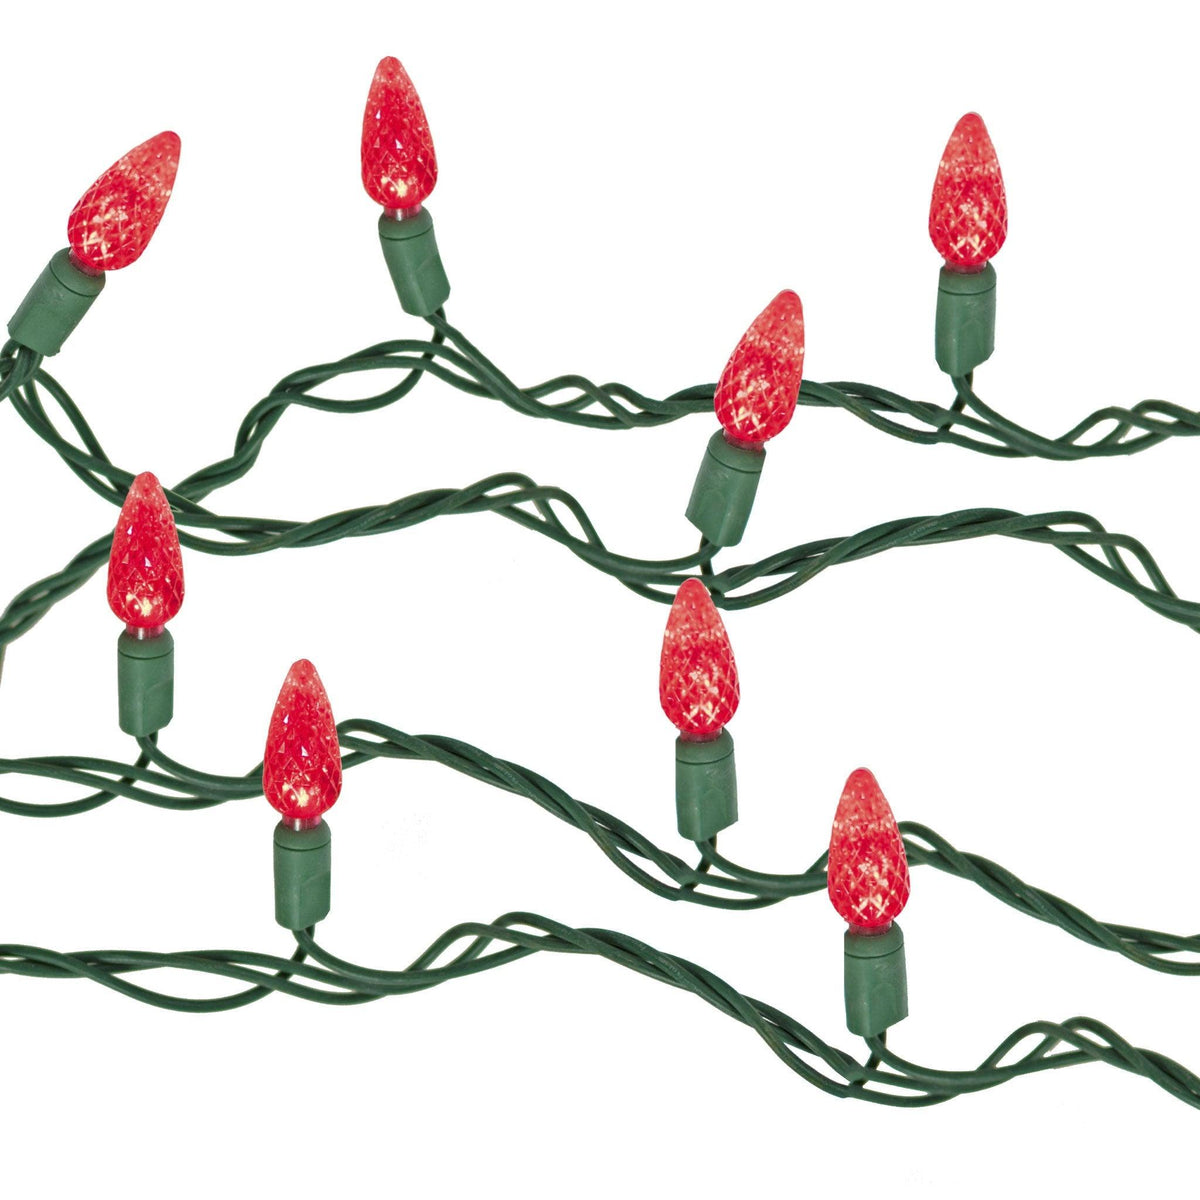 Purchase a brand new set of Lee Display's C6 LED Red Christmas String Lights with Green Wire at leedisplay.com